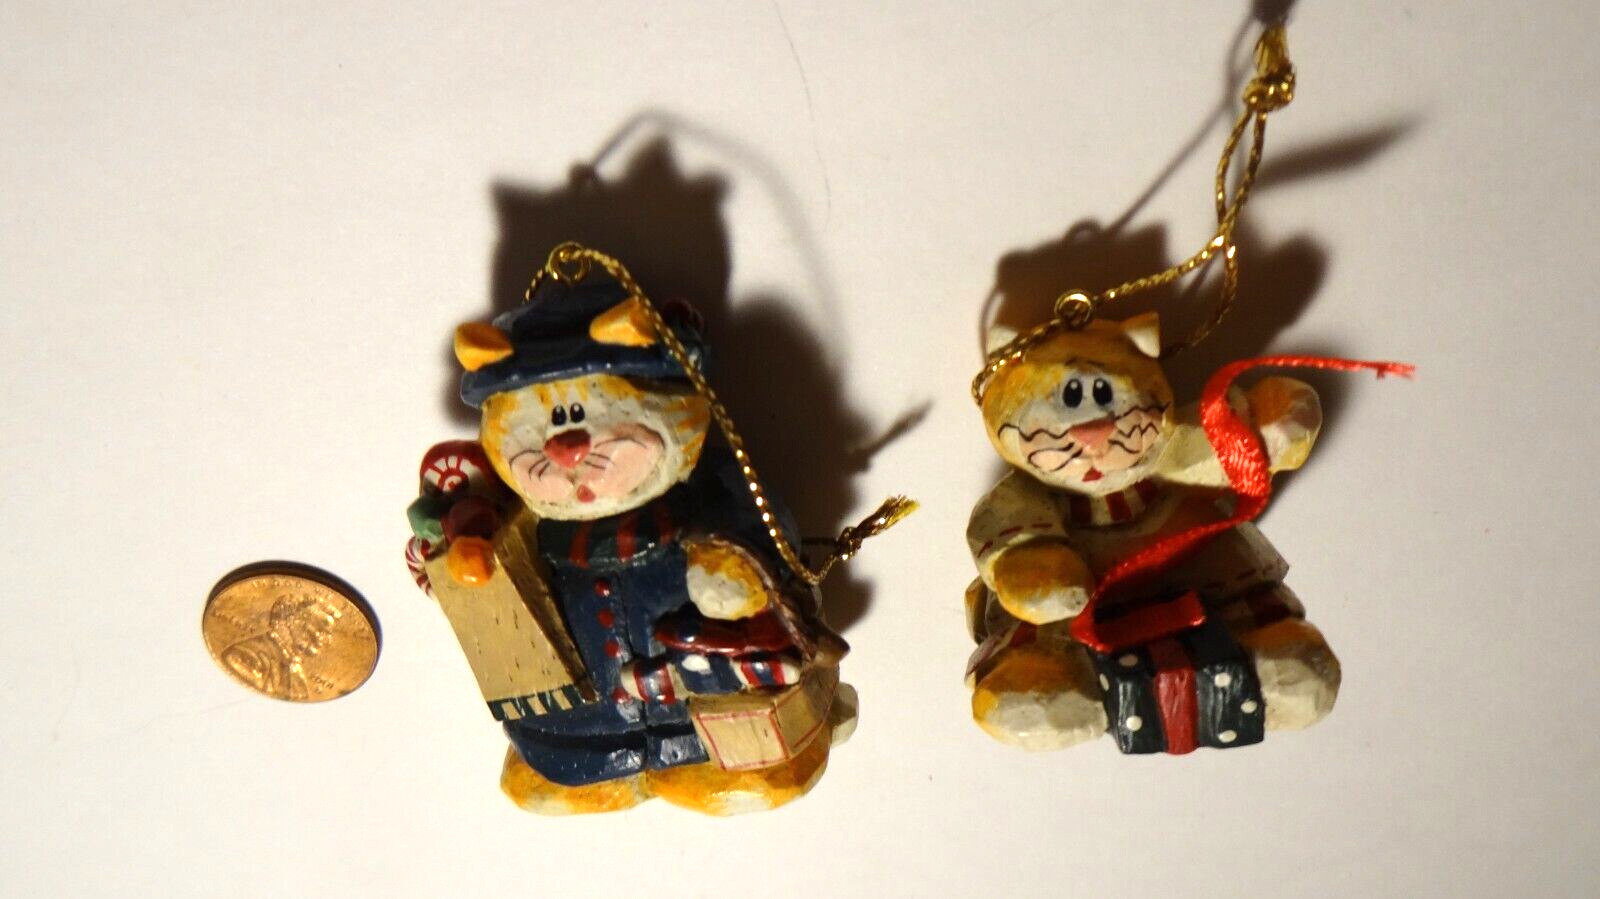 Vintage 1960s E W Brand Handmade-Handpainted Wood Two Cats Christmas Ornament